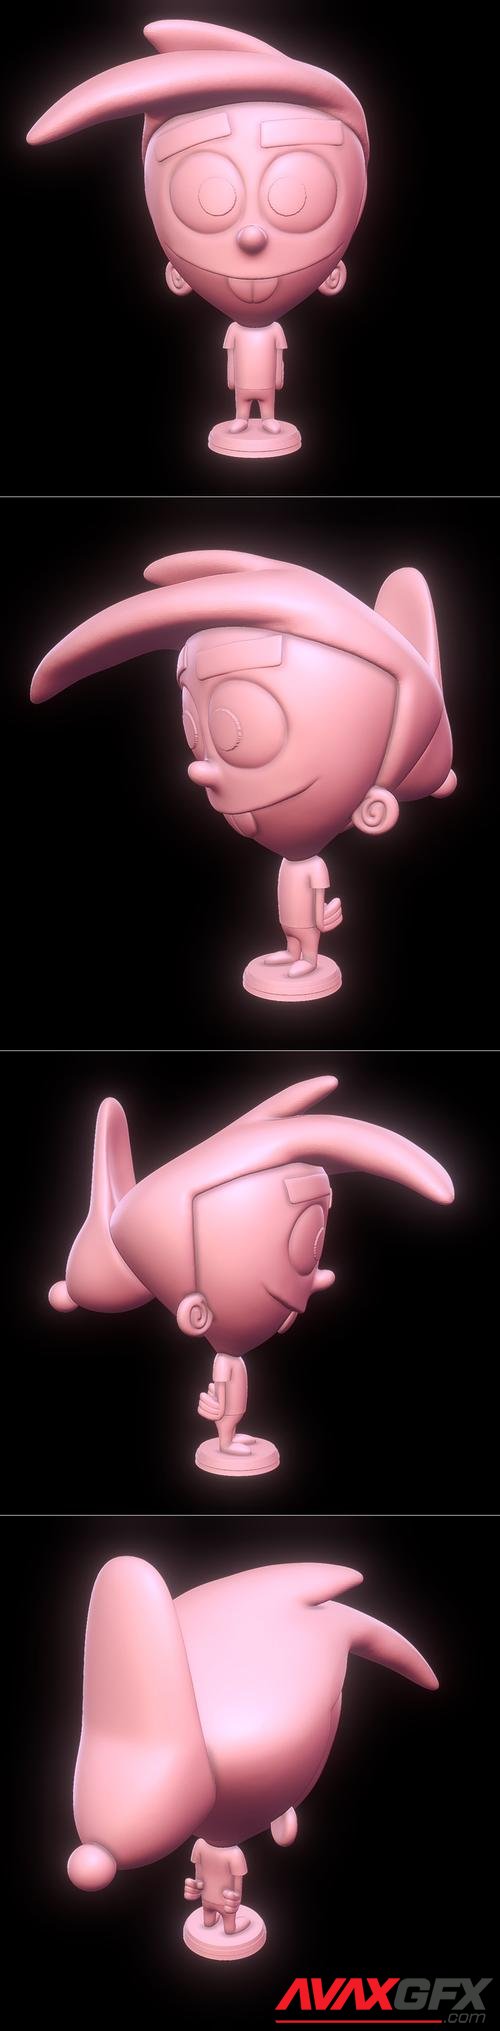 Timmy Turner - The Fairly OddParents – 3D Print